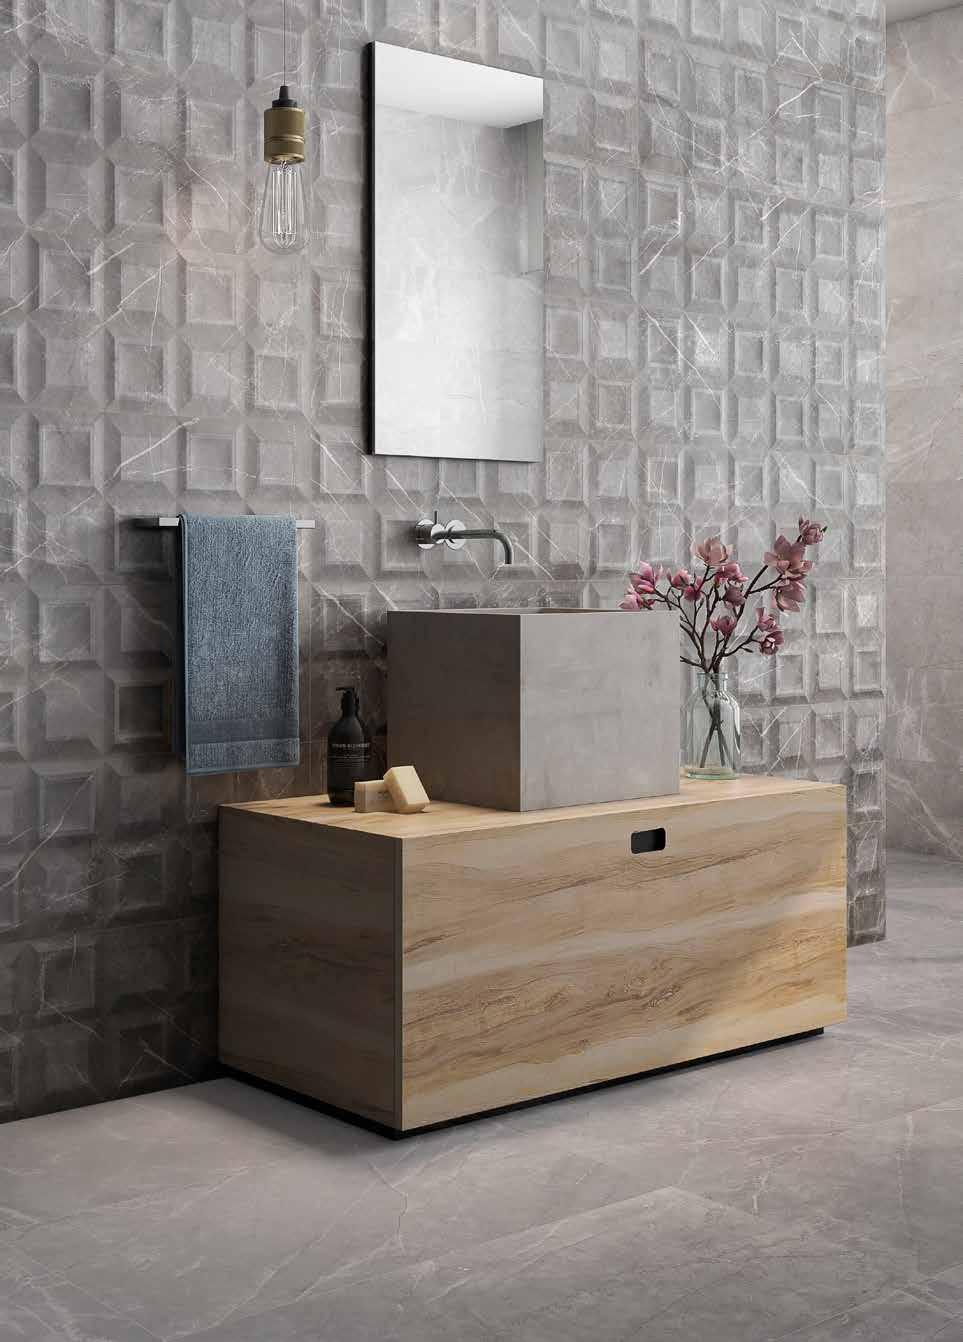 our new range of large format tiles, making smaller